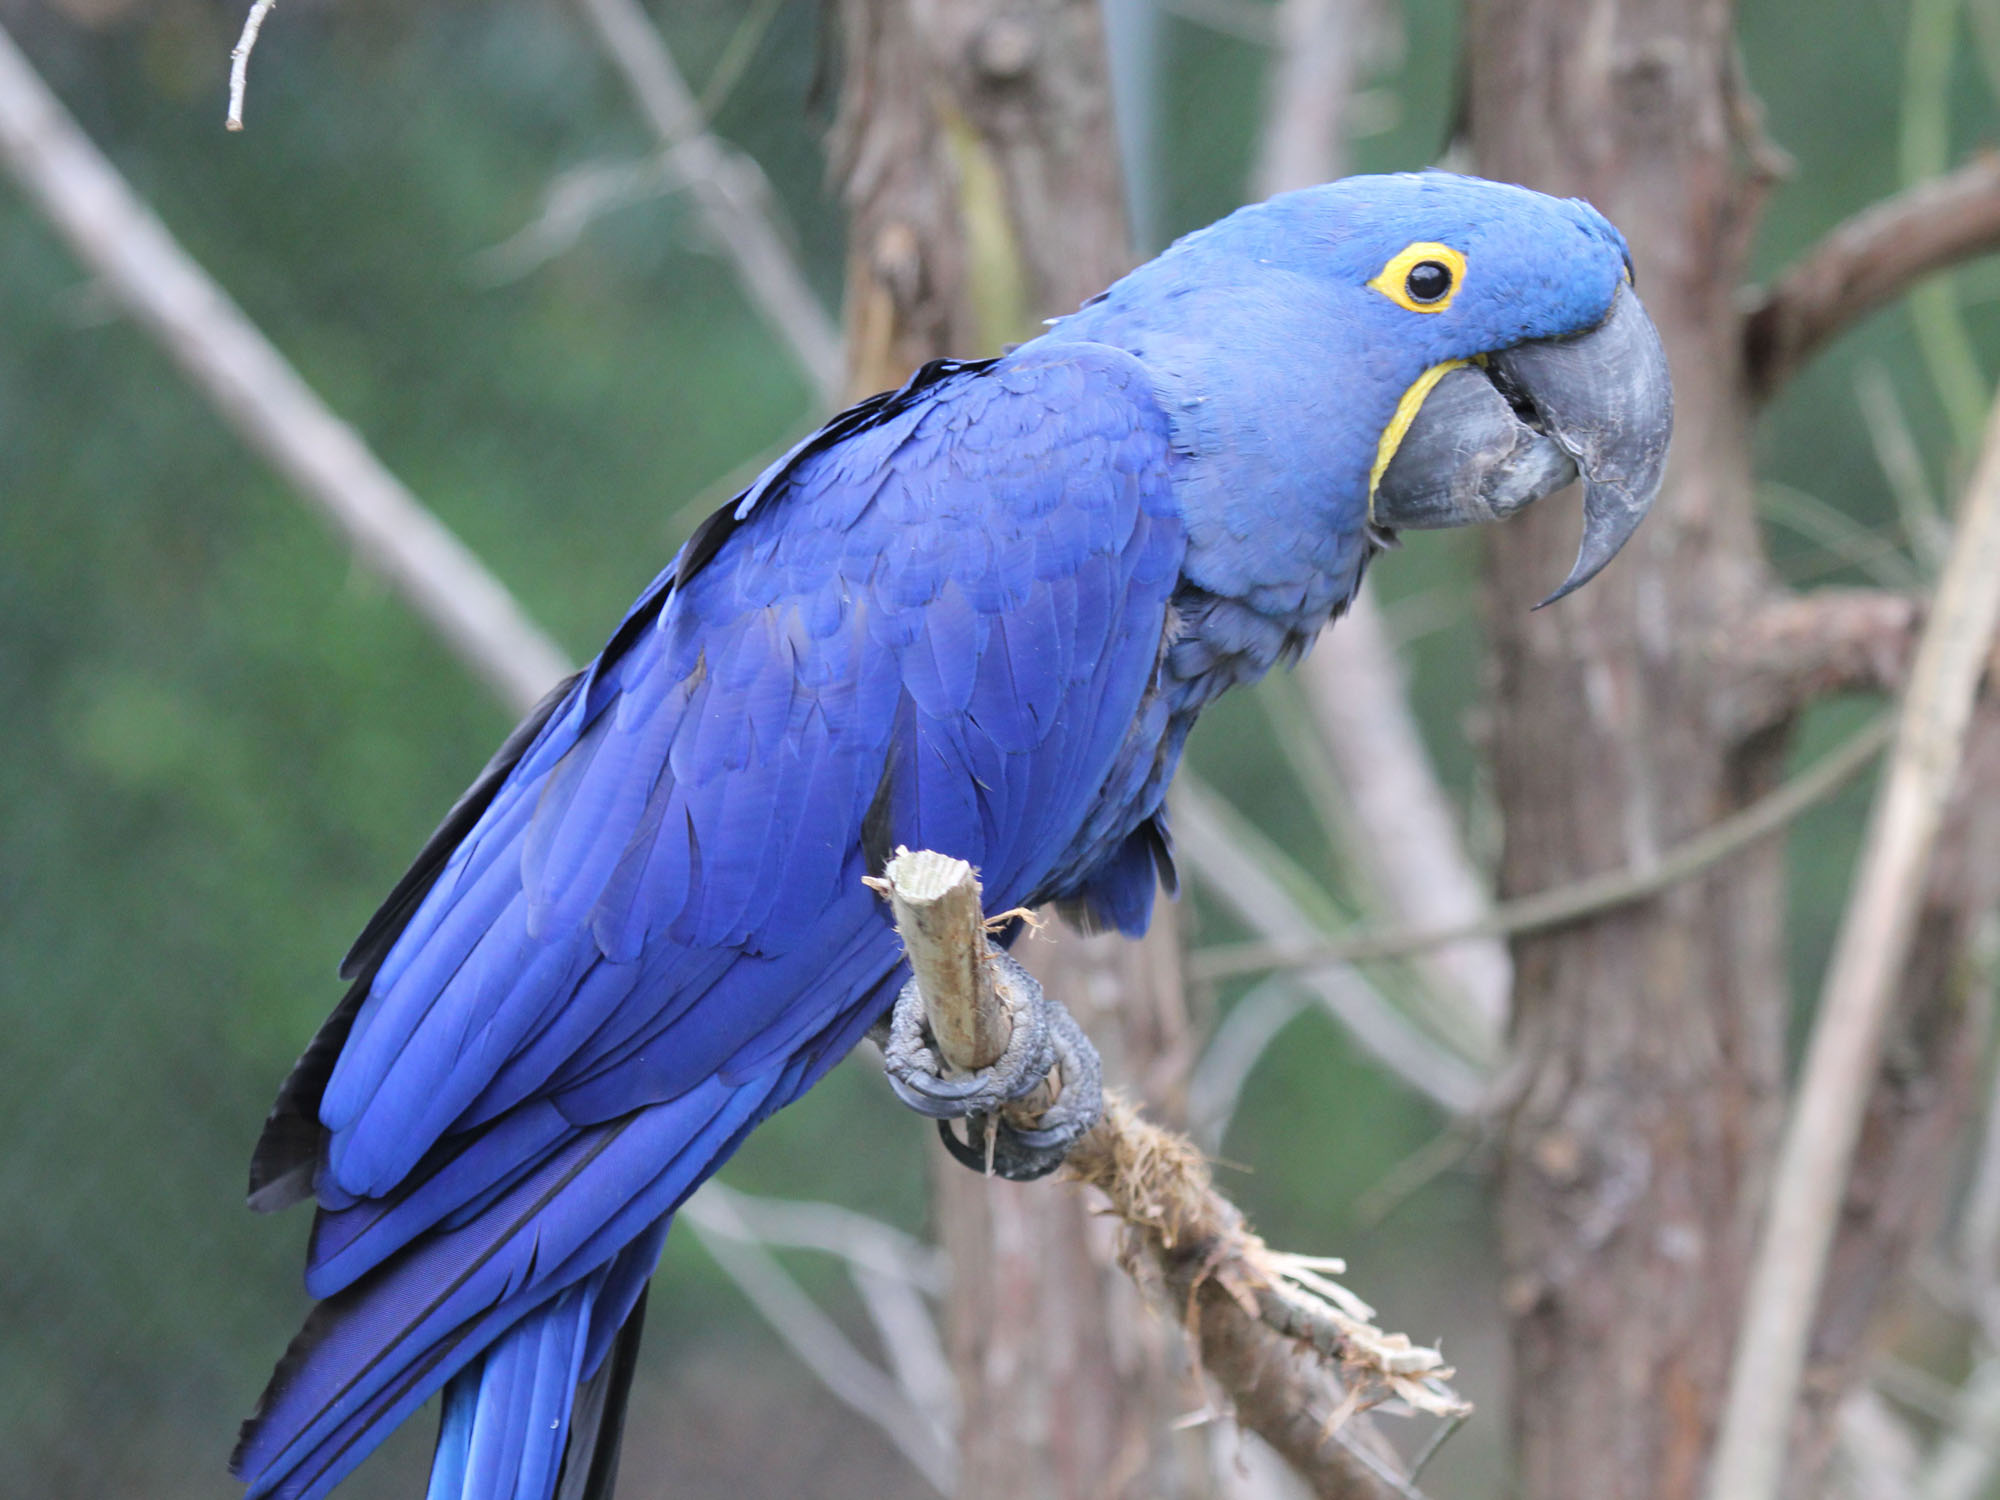 Birds of The World: MACAWS